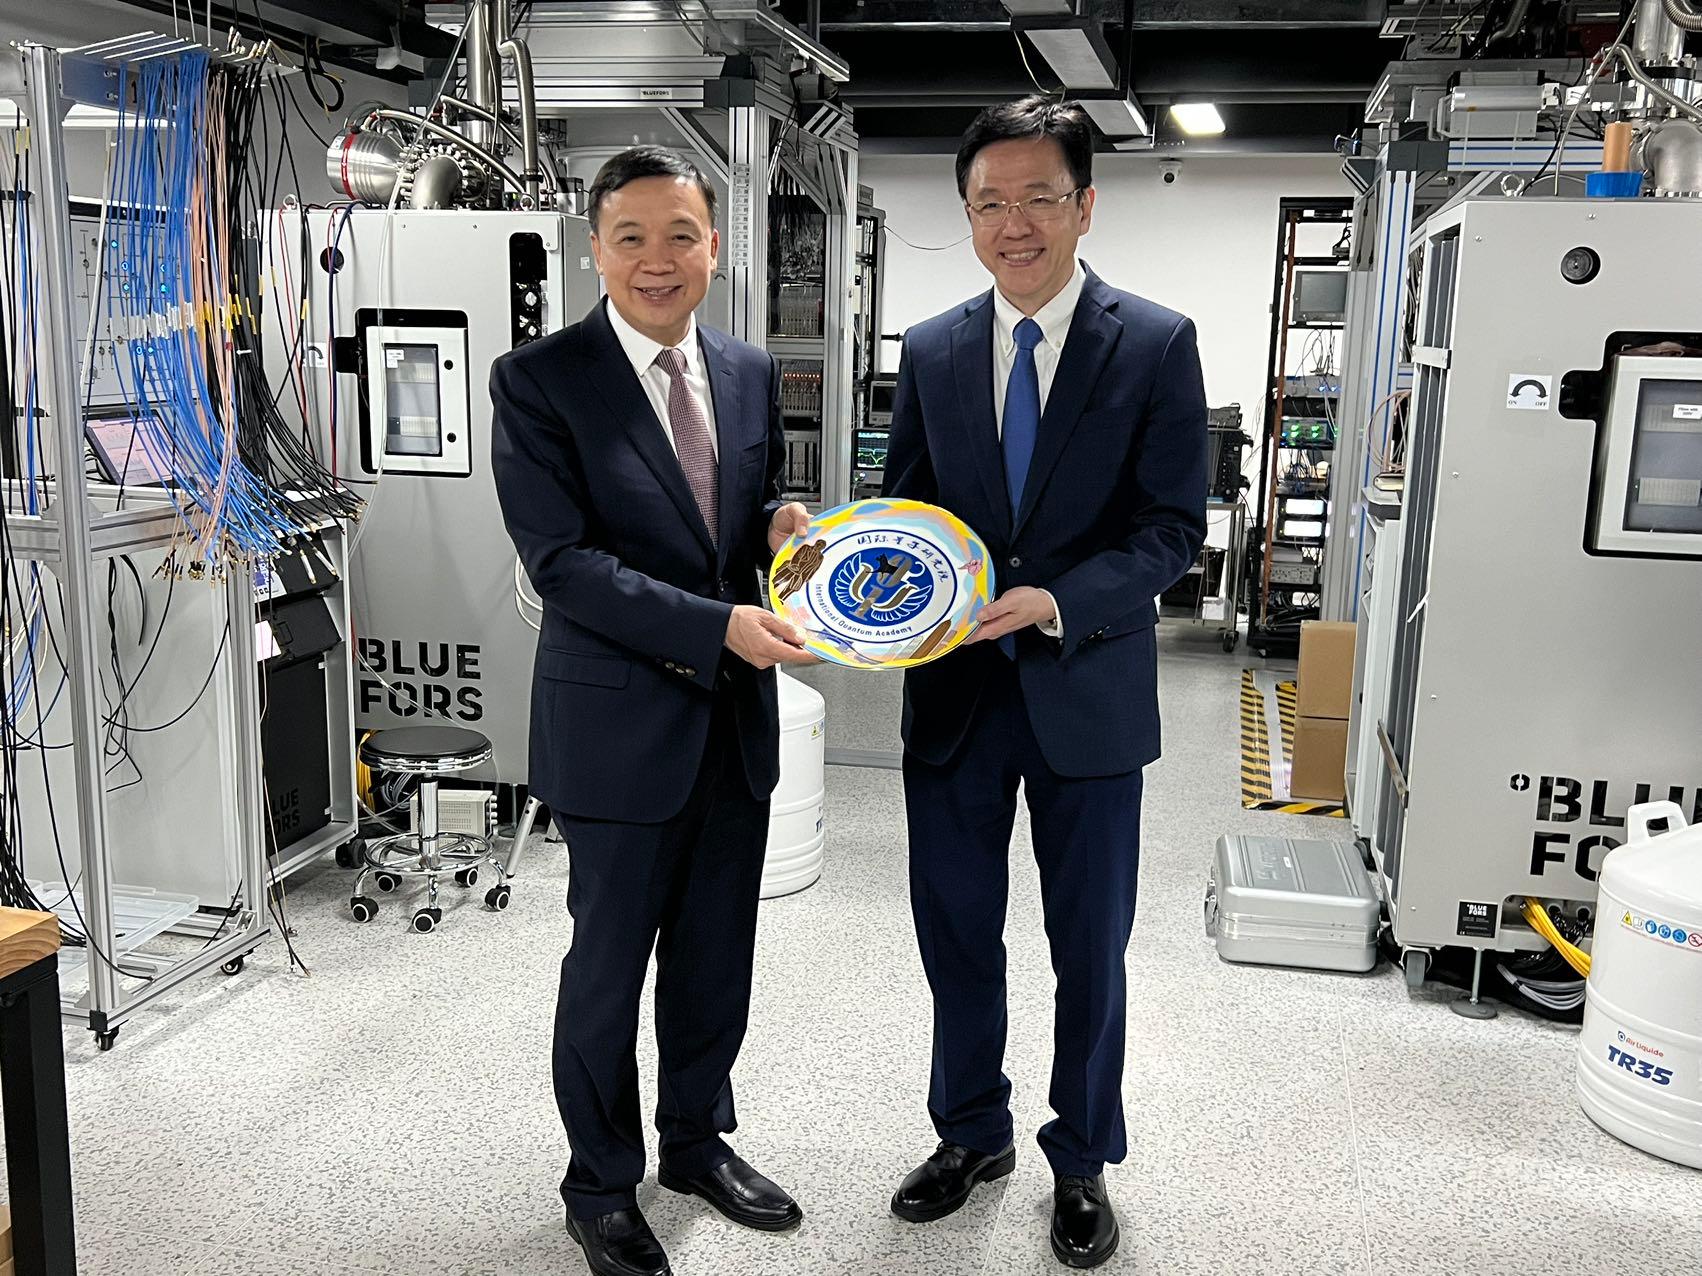 The Secretary for Innovation, Technology and Industry, Professor Sun Dong (right), visits the Shenzhen International Quantum Academy in Shenzhen today (March 30) and is pictured with Member of the Standing Committee of the Communist Party of China Shenzhen Municipal Committee Mr Zheng Hongbo (left).